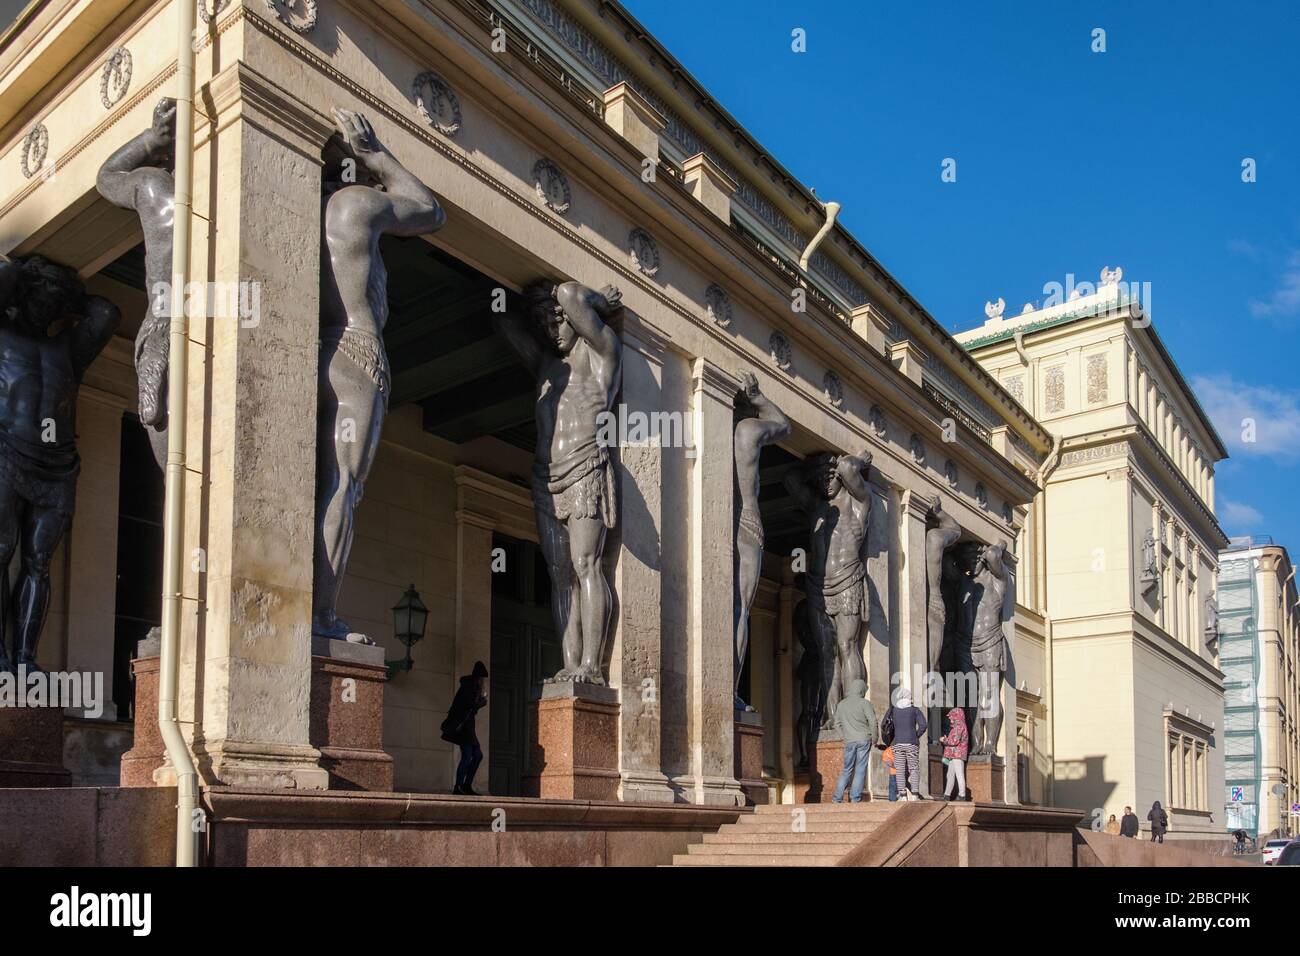 Sculptures of atlantes, Portico of the New Hermitage on Millionnaya Street, State Hermitage Museum, St Petersburg Russia Stock Photo